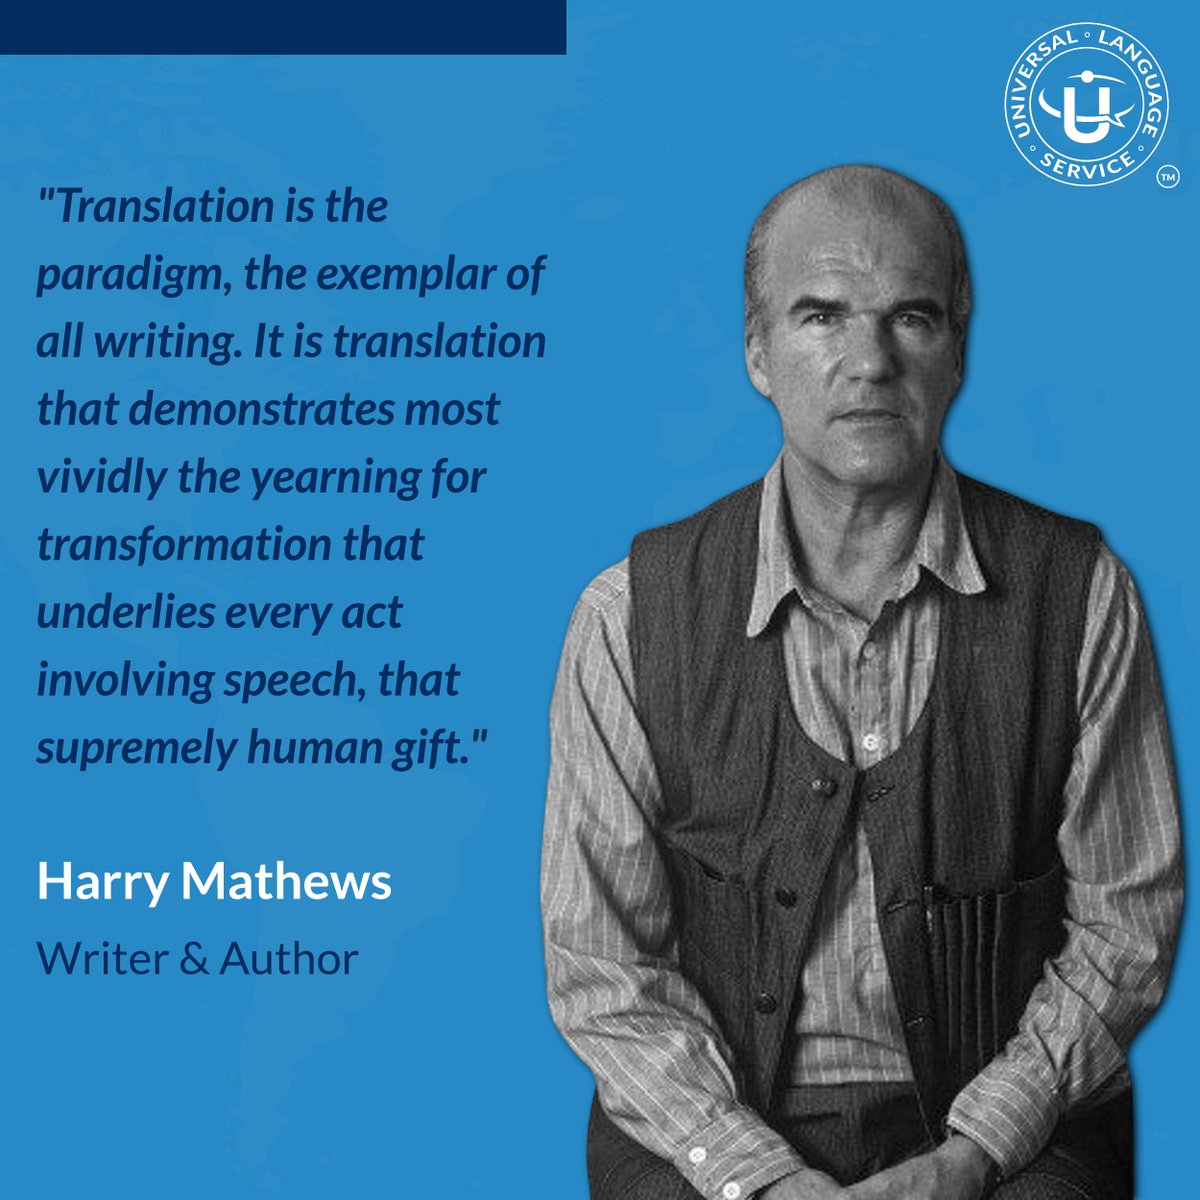 Harry Mathews reminds us that in the alchemy of translation, every word is a step towards mutual understanding.

🔗 universallanguageservice.com

#QuoteofTheMonth #LanguageAccess #LanguageDiversity #Interpreting #Translation #HarryMathew #TranslationQuote